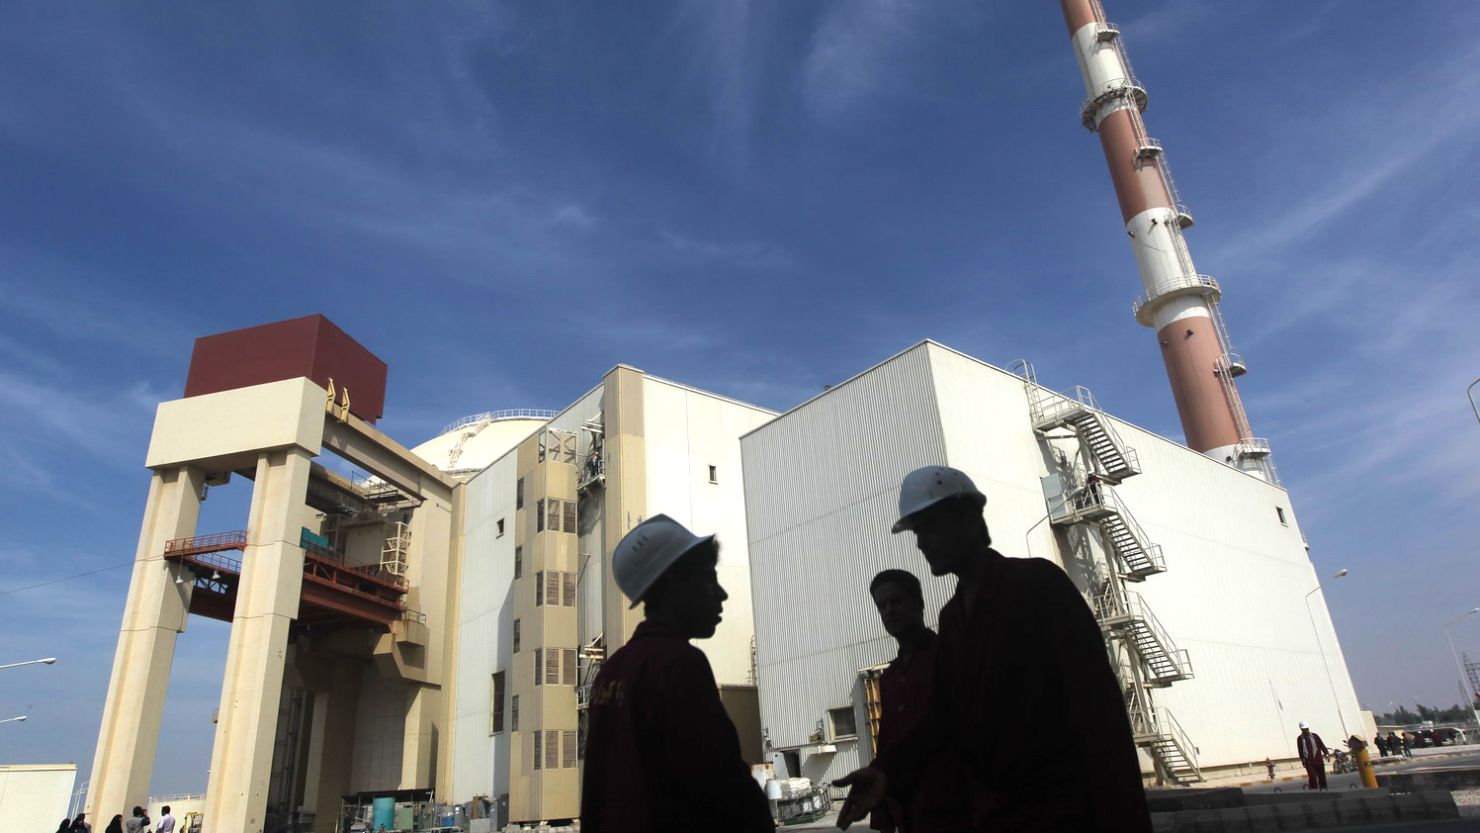 Russians built the Bushehr nuclear power plant, shown here, and has vowed to build more reactors for Iran.